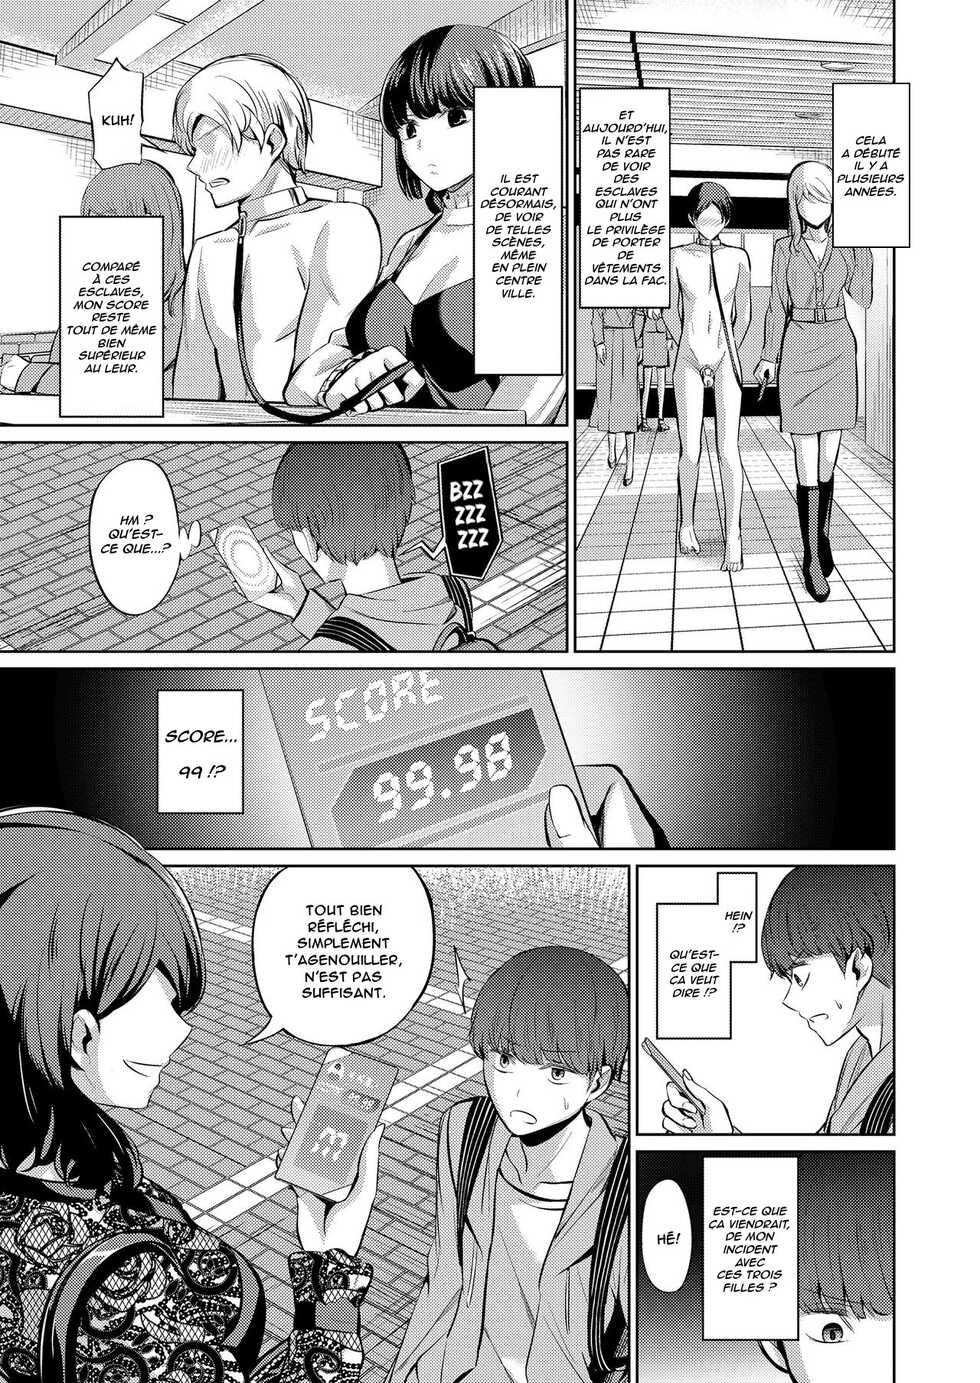 [Yamahata Rian] Tensuushugi no Kuni | A Country Based on Point System (Girls forM Vol. 20) [French] [Anatoh] [Digital] - Page 7